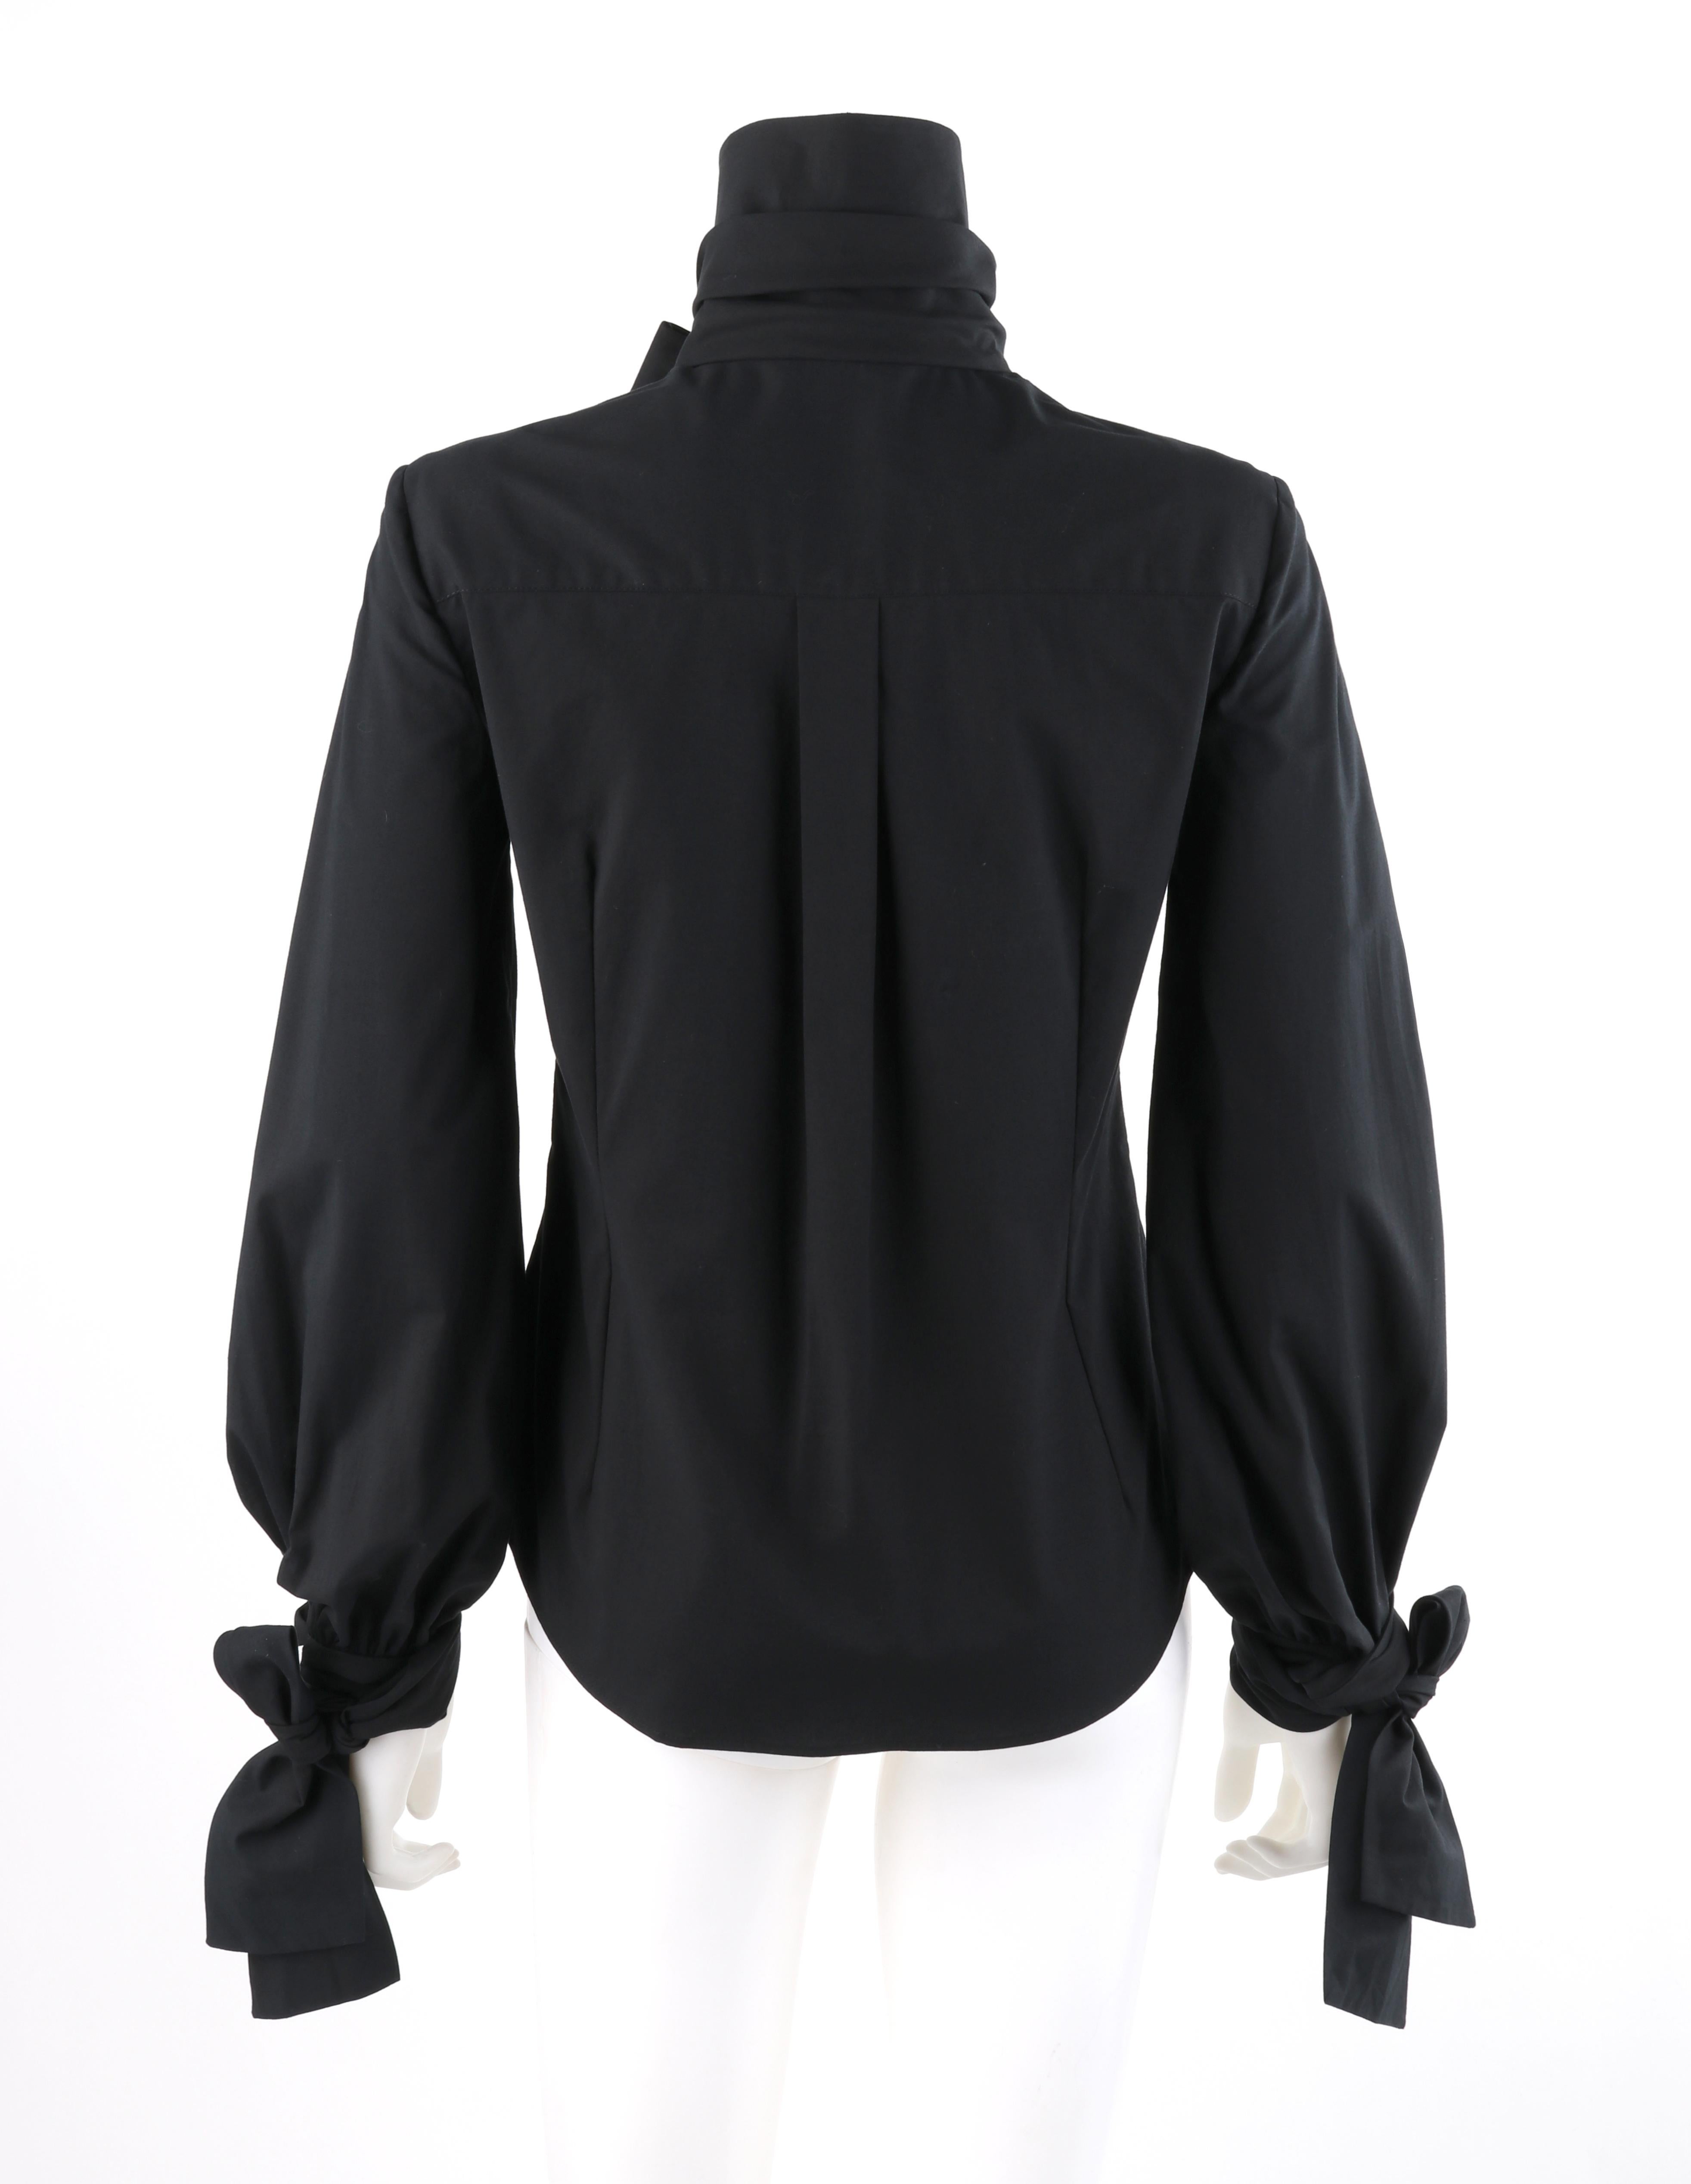 ALEXANDER McQUEEN A/W 2008 “The Girl Who Lived In The Tree” Black Tie Blouse 3